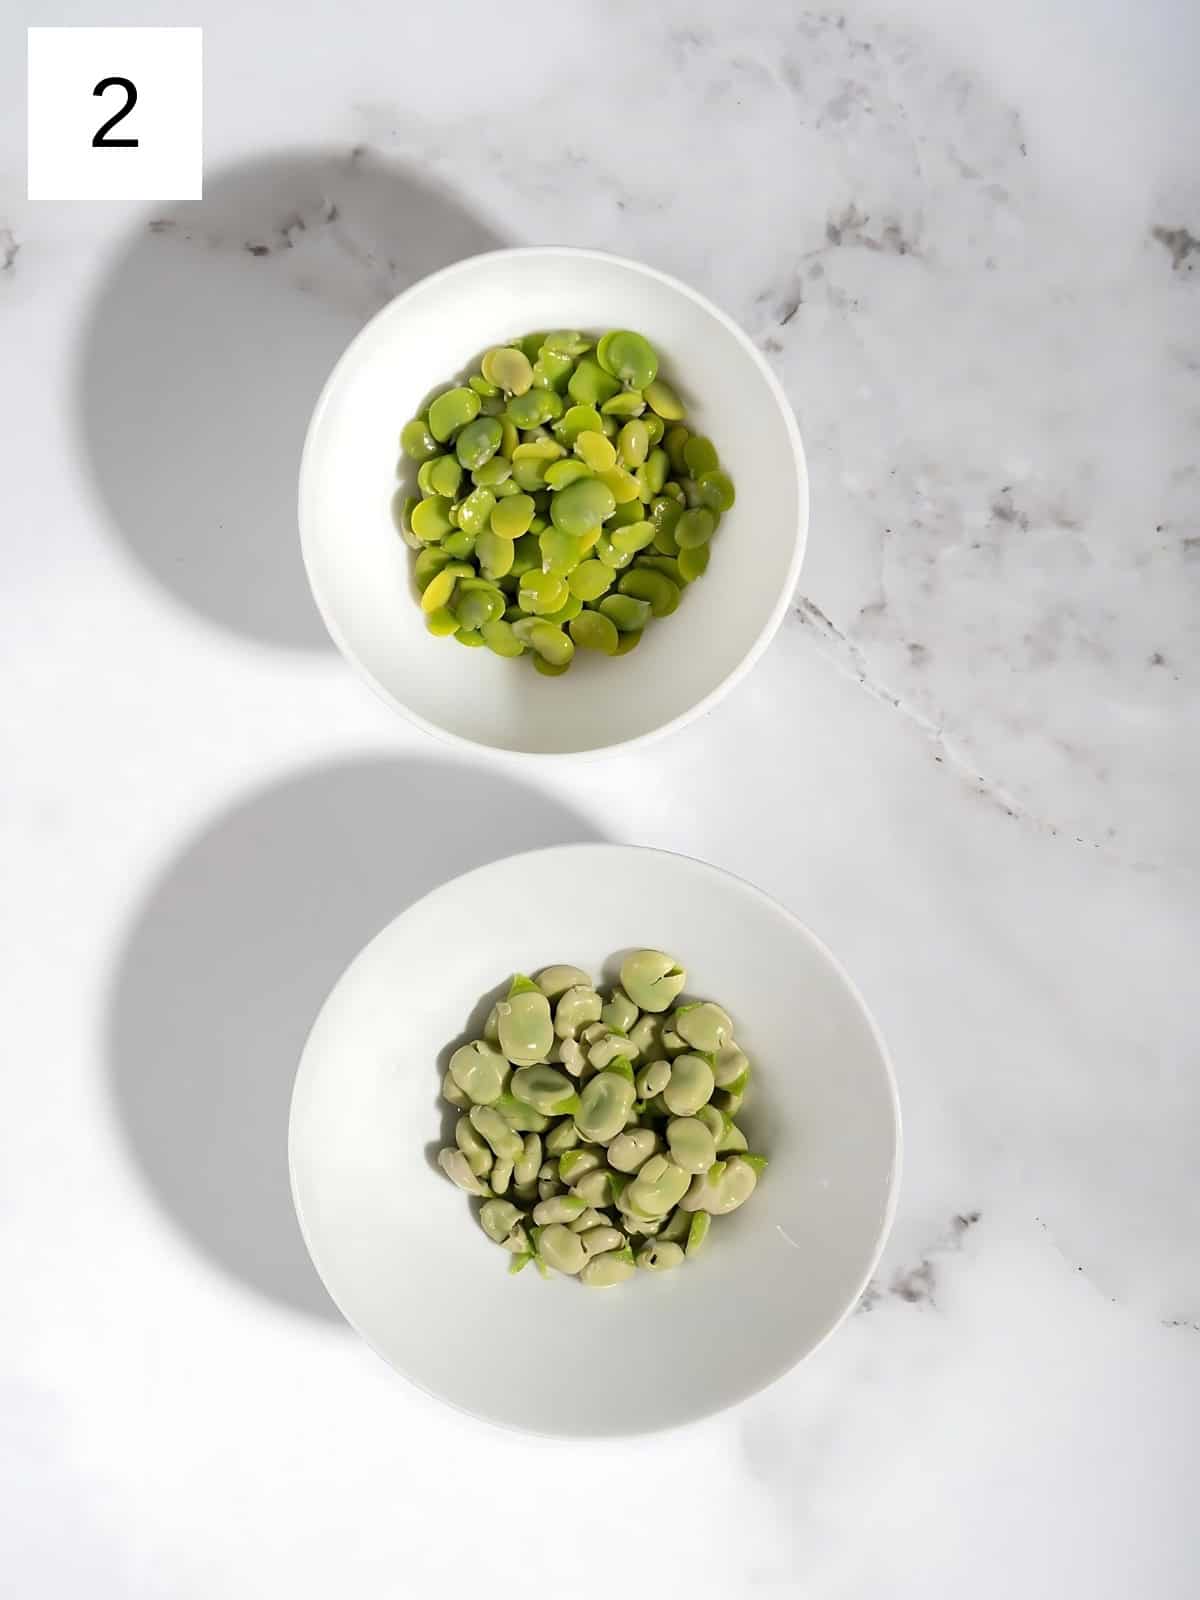 Peeled and de-shelled fava beans separated into bowls.